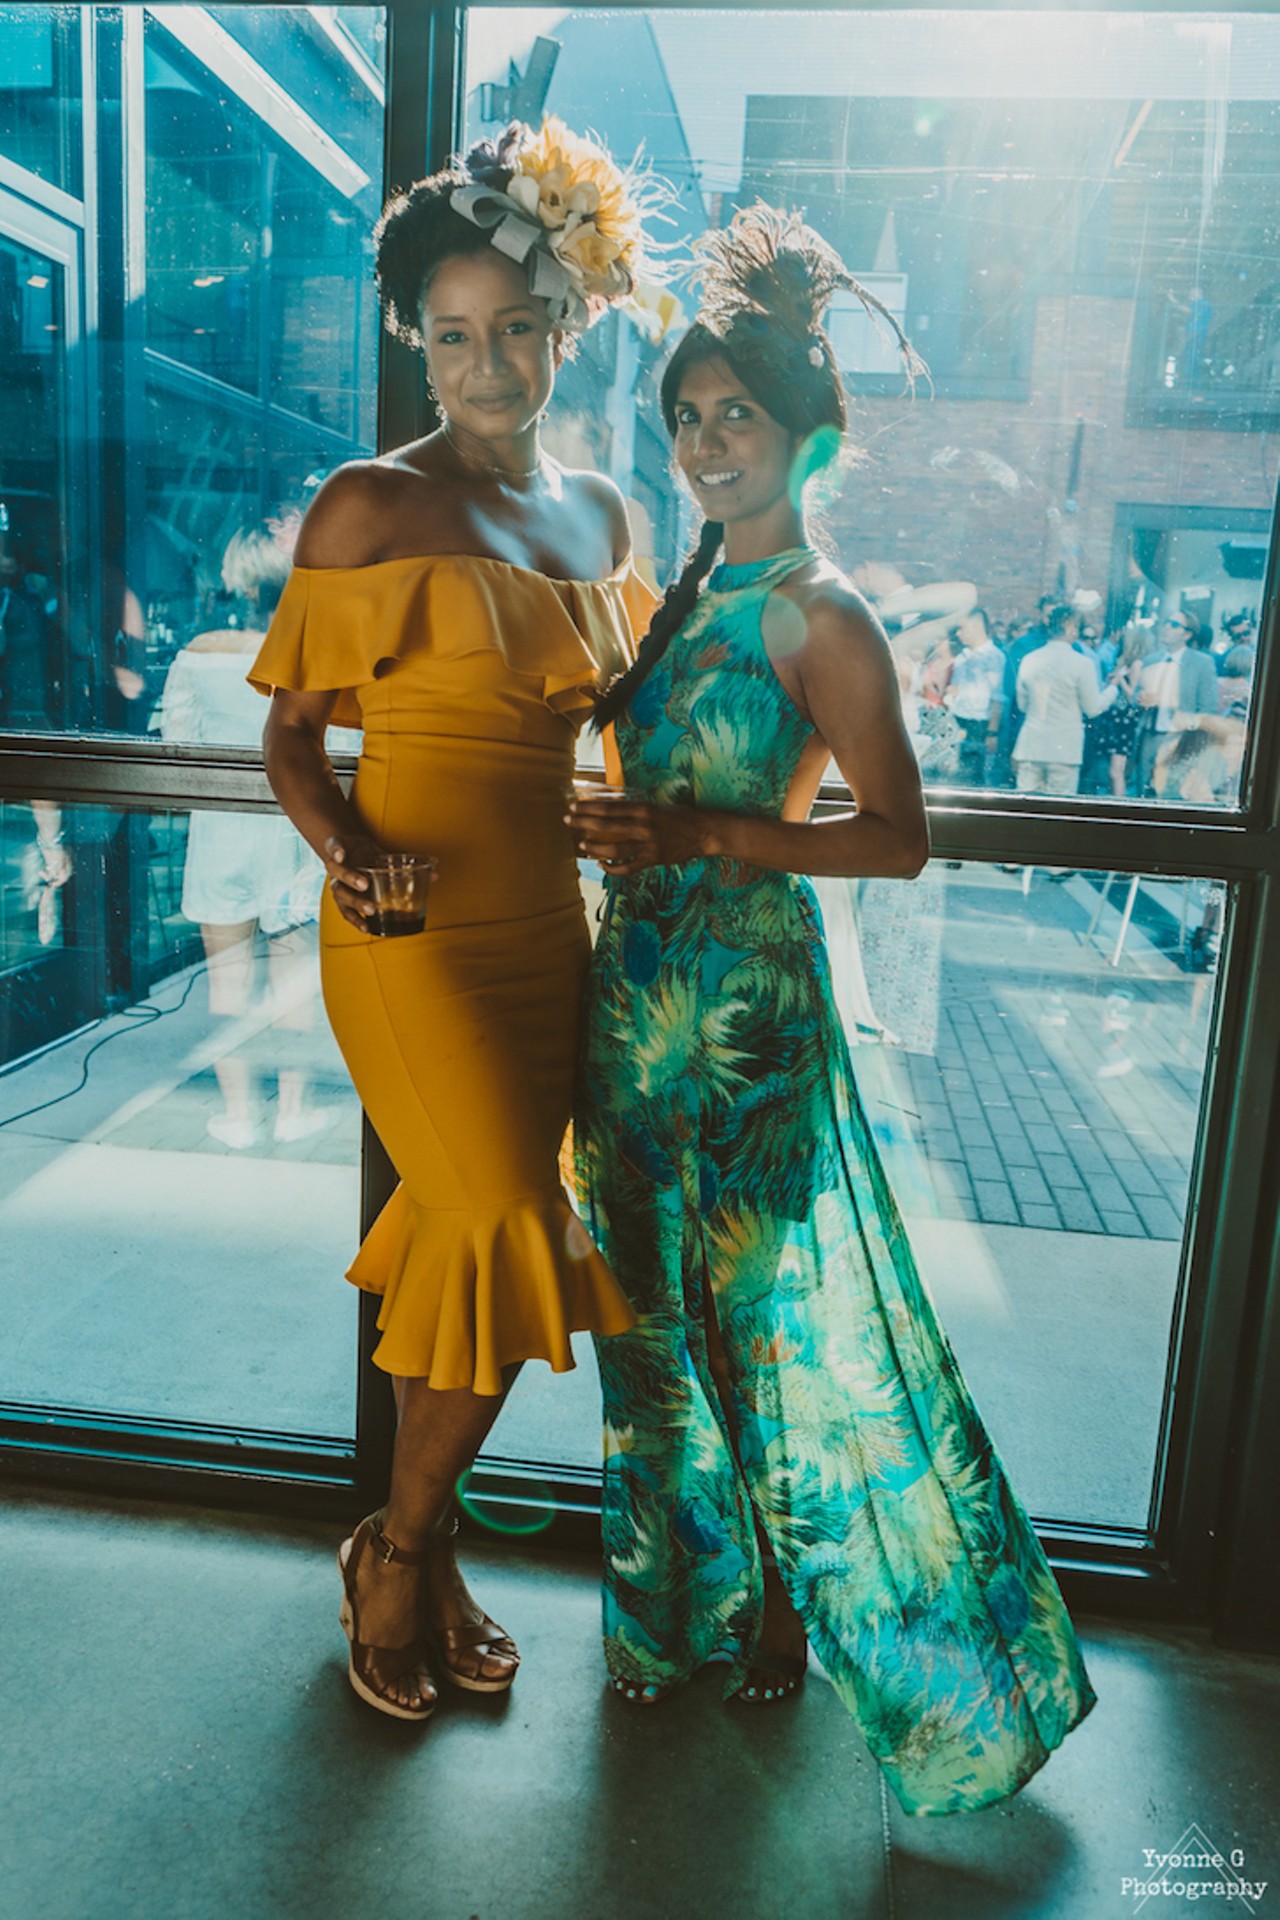 Everyone we saw at Armature Works' 1st Annual Derby Day Watch Party